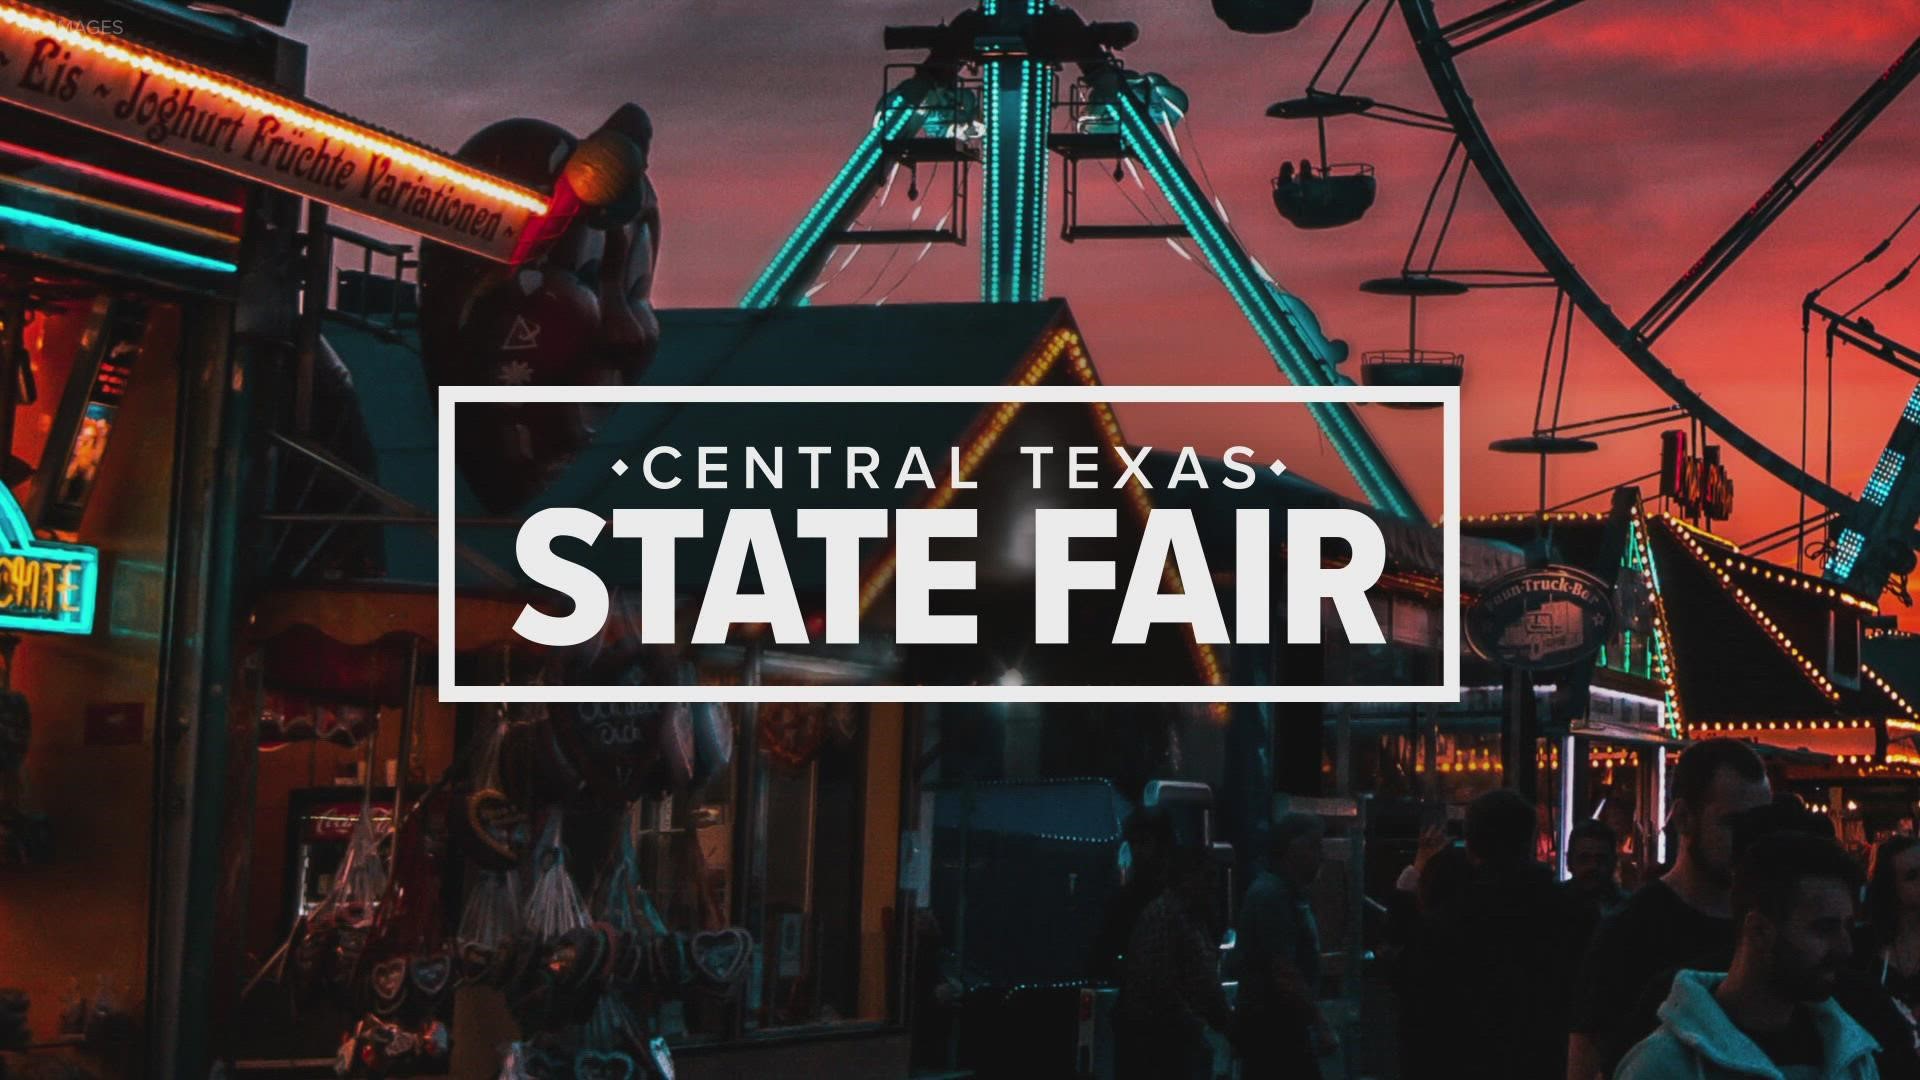 The Bell County Expo Center was home to the 35th annual Central Texas State Fair Sept. 1st - Sept. 4th.